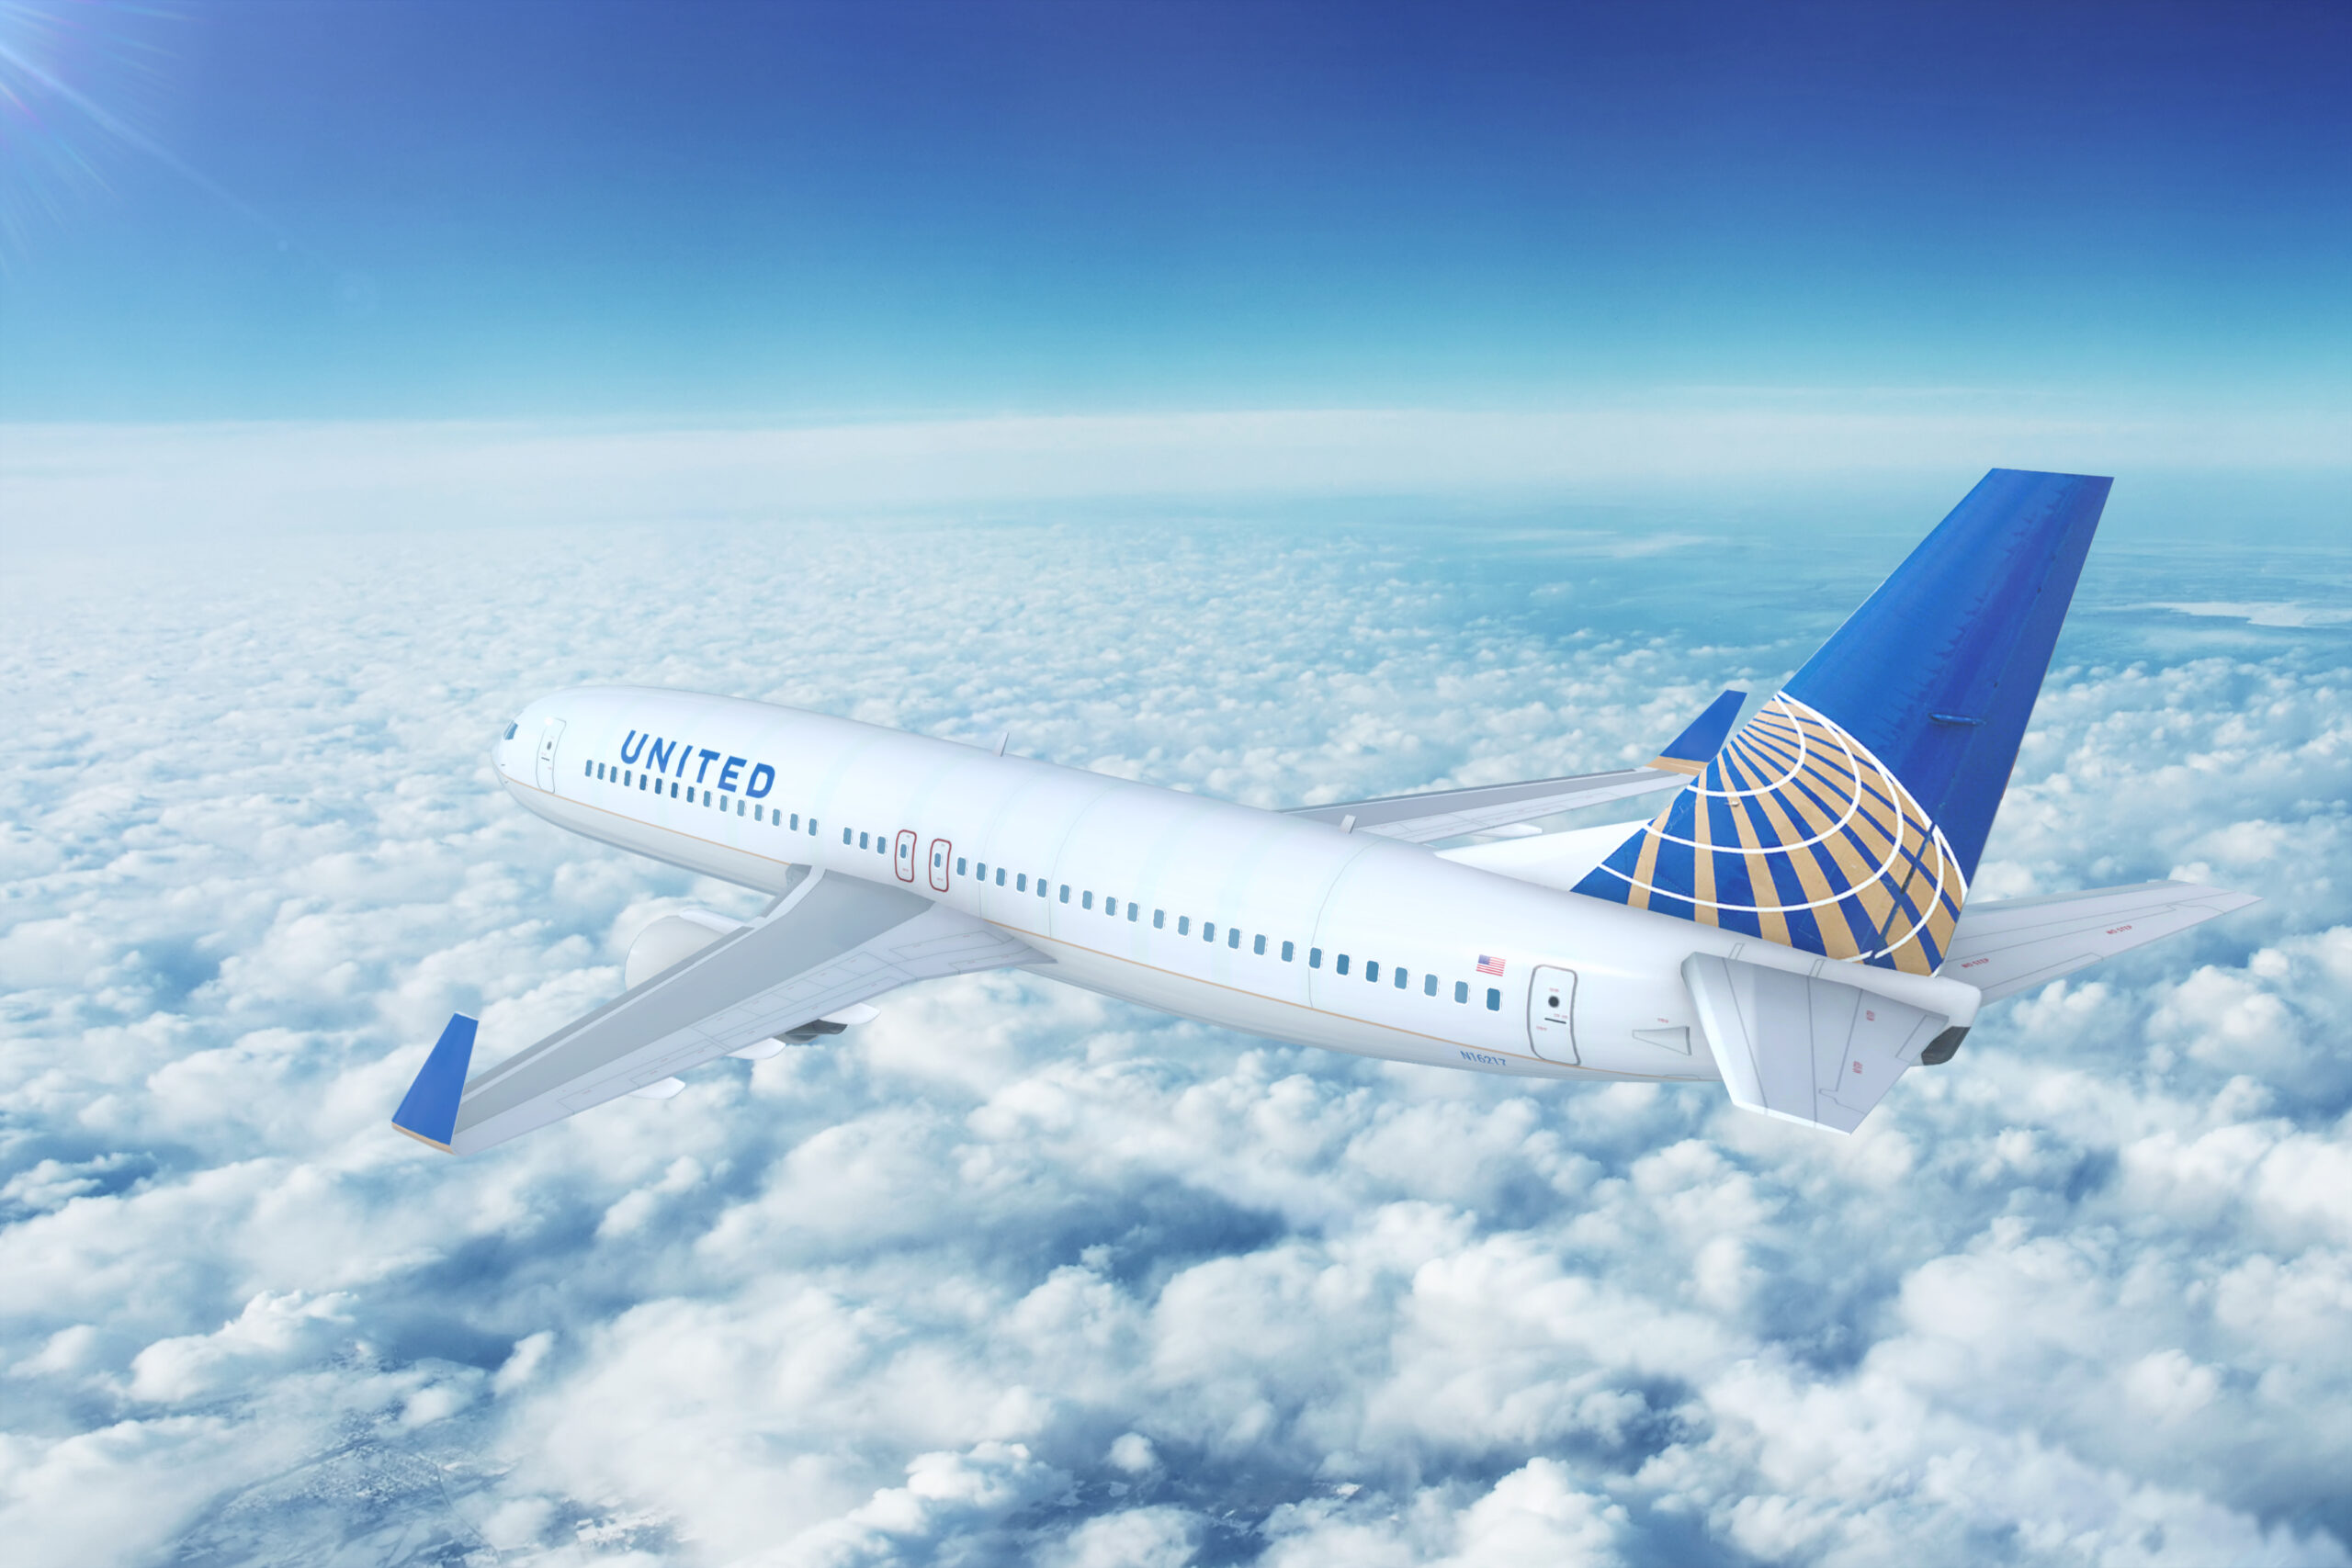 United Airlines plans to cut flights from affected airports without affecting its international flights. (Photo Credit: NextNewMedia / Shutterstock)